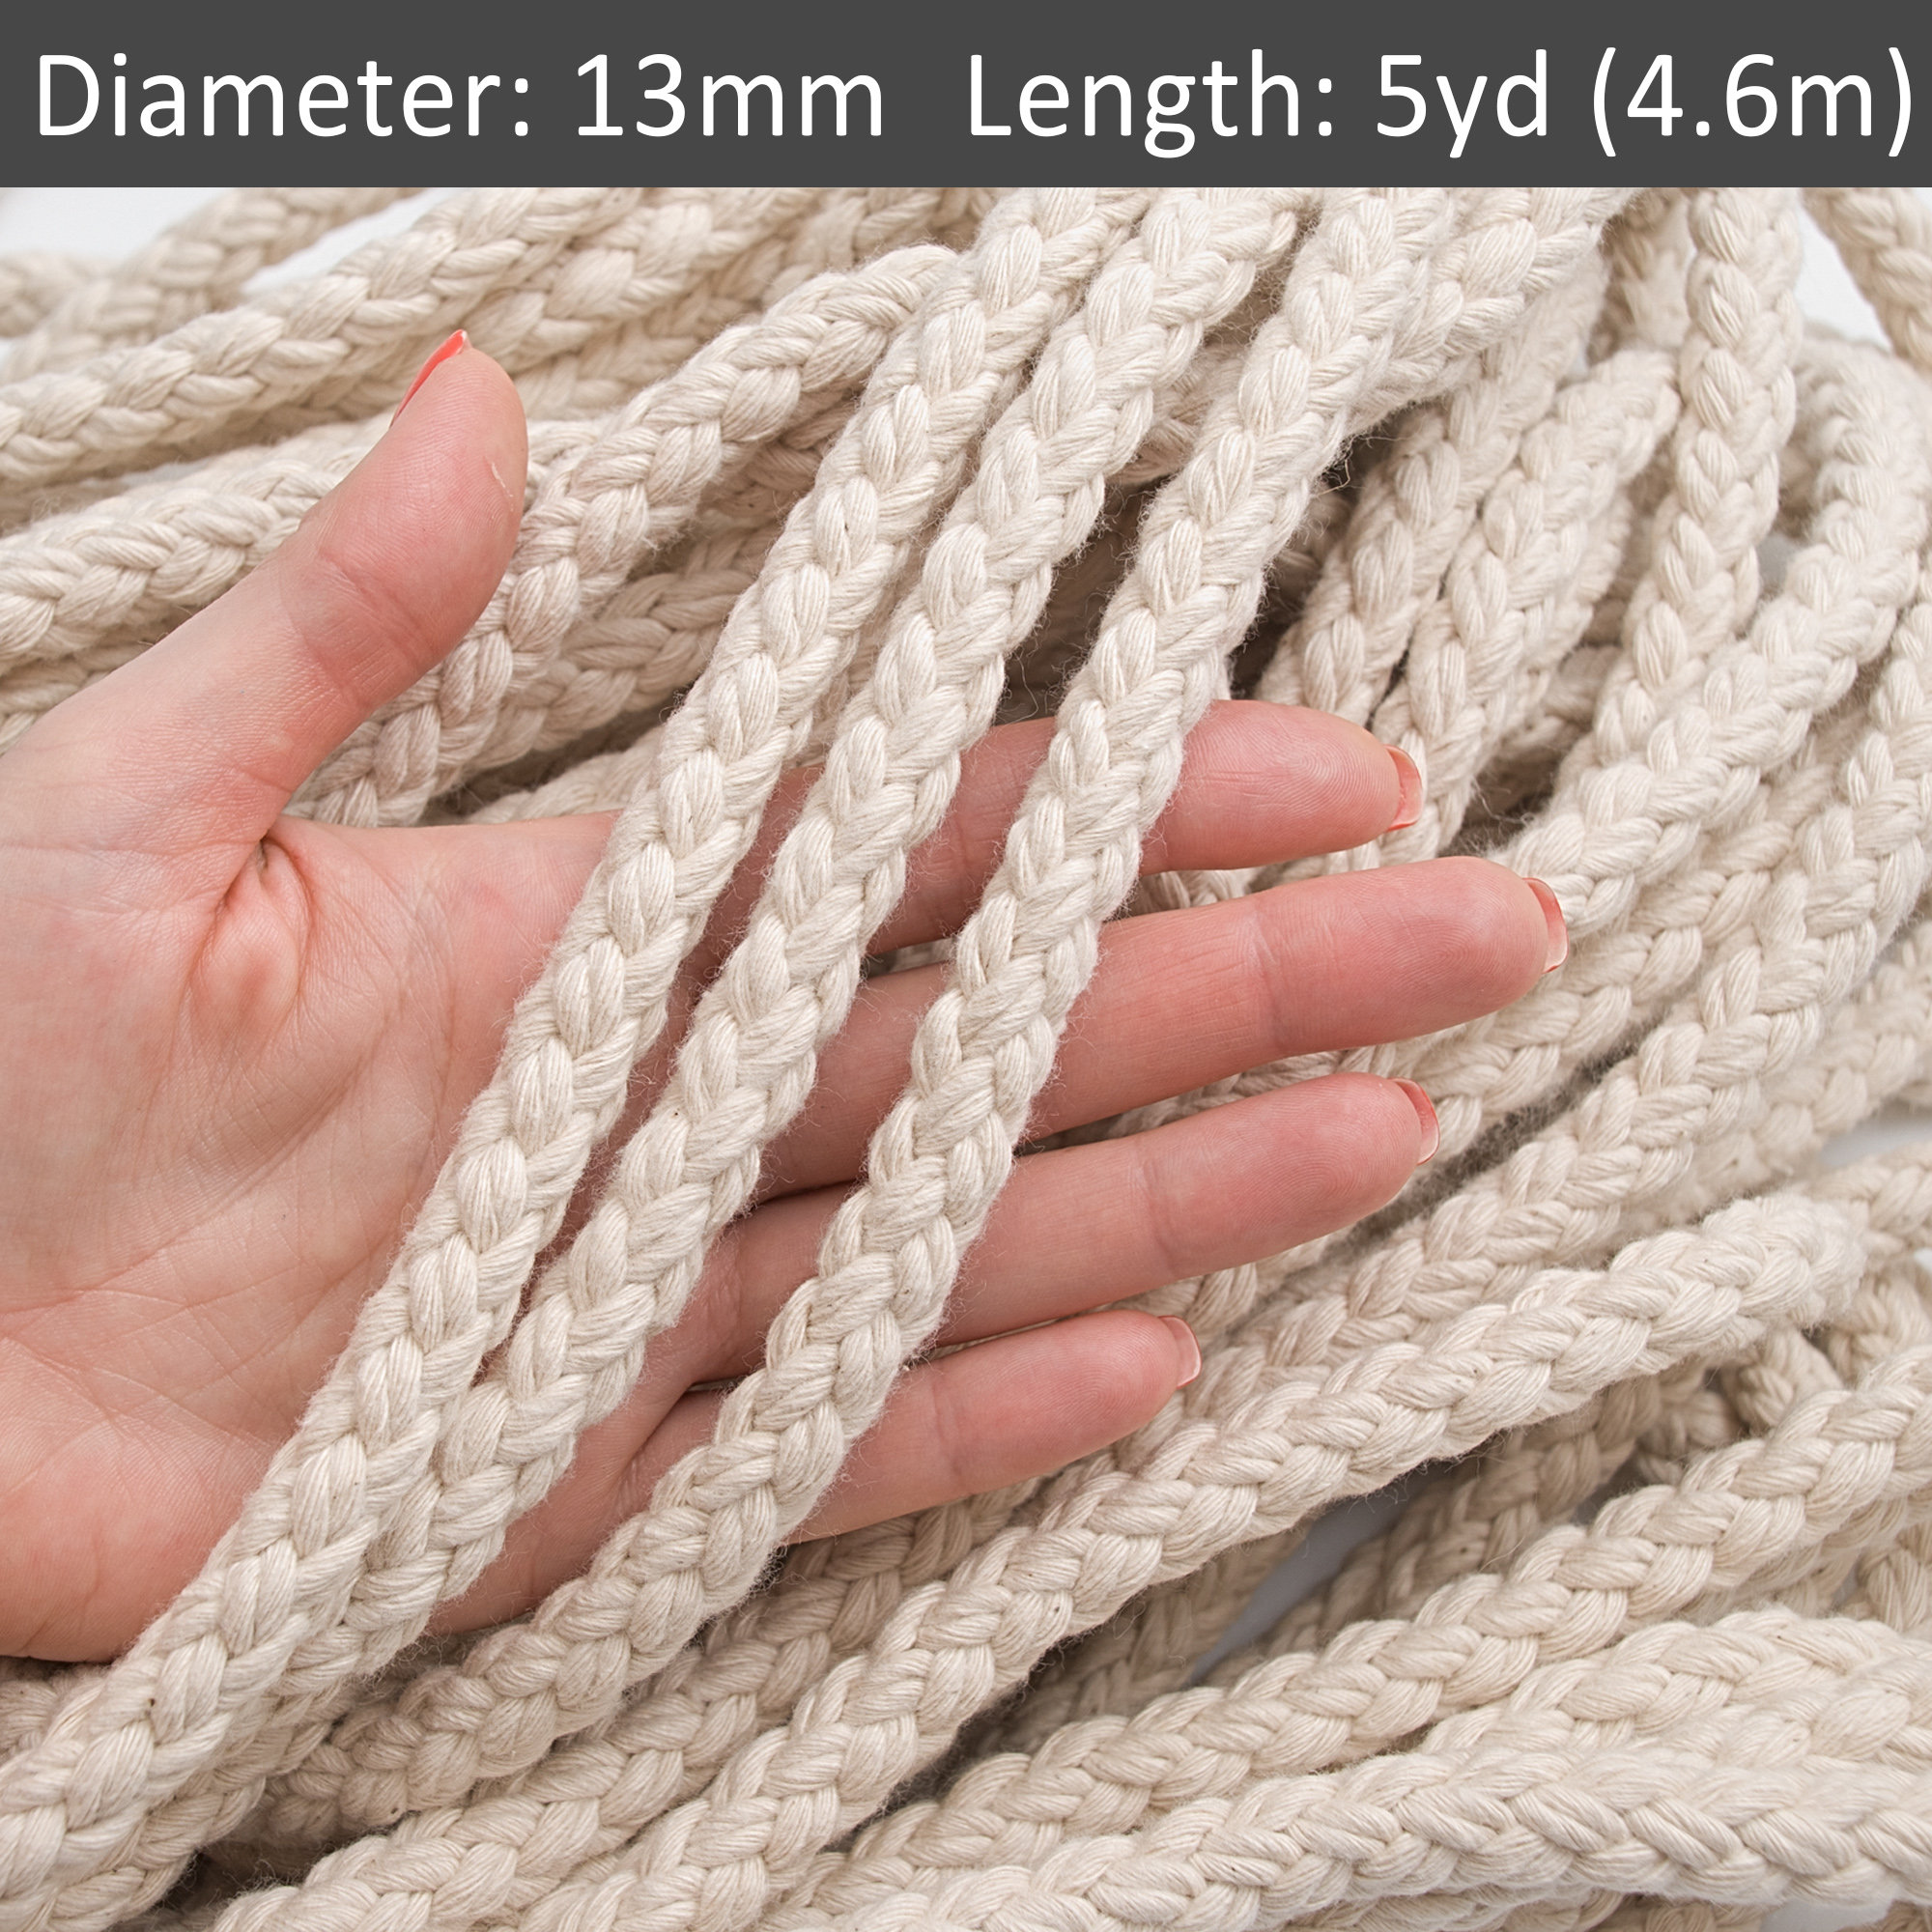 Beige Cotton Rope 12mm. Nautical Rope. Twisted Thick Rope. Decoration Rope.  Craft Supplies. Nautical Decor / 30ft 10yd 9m 